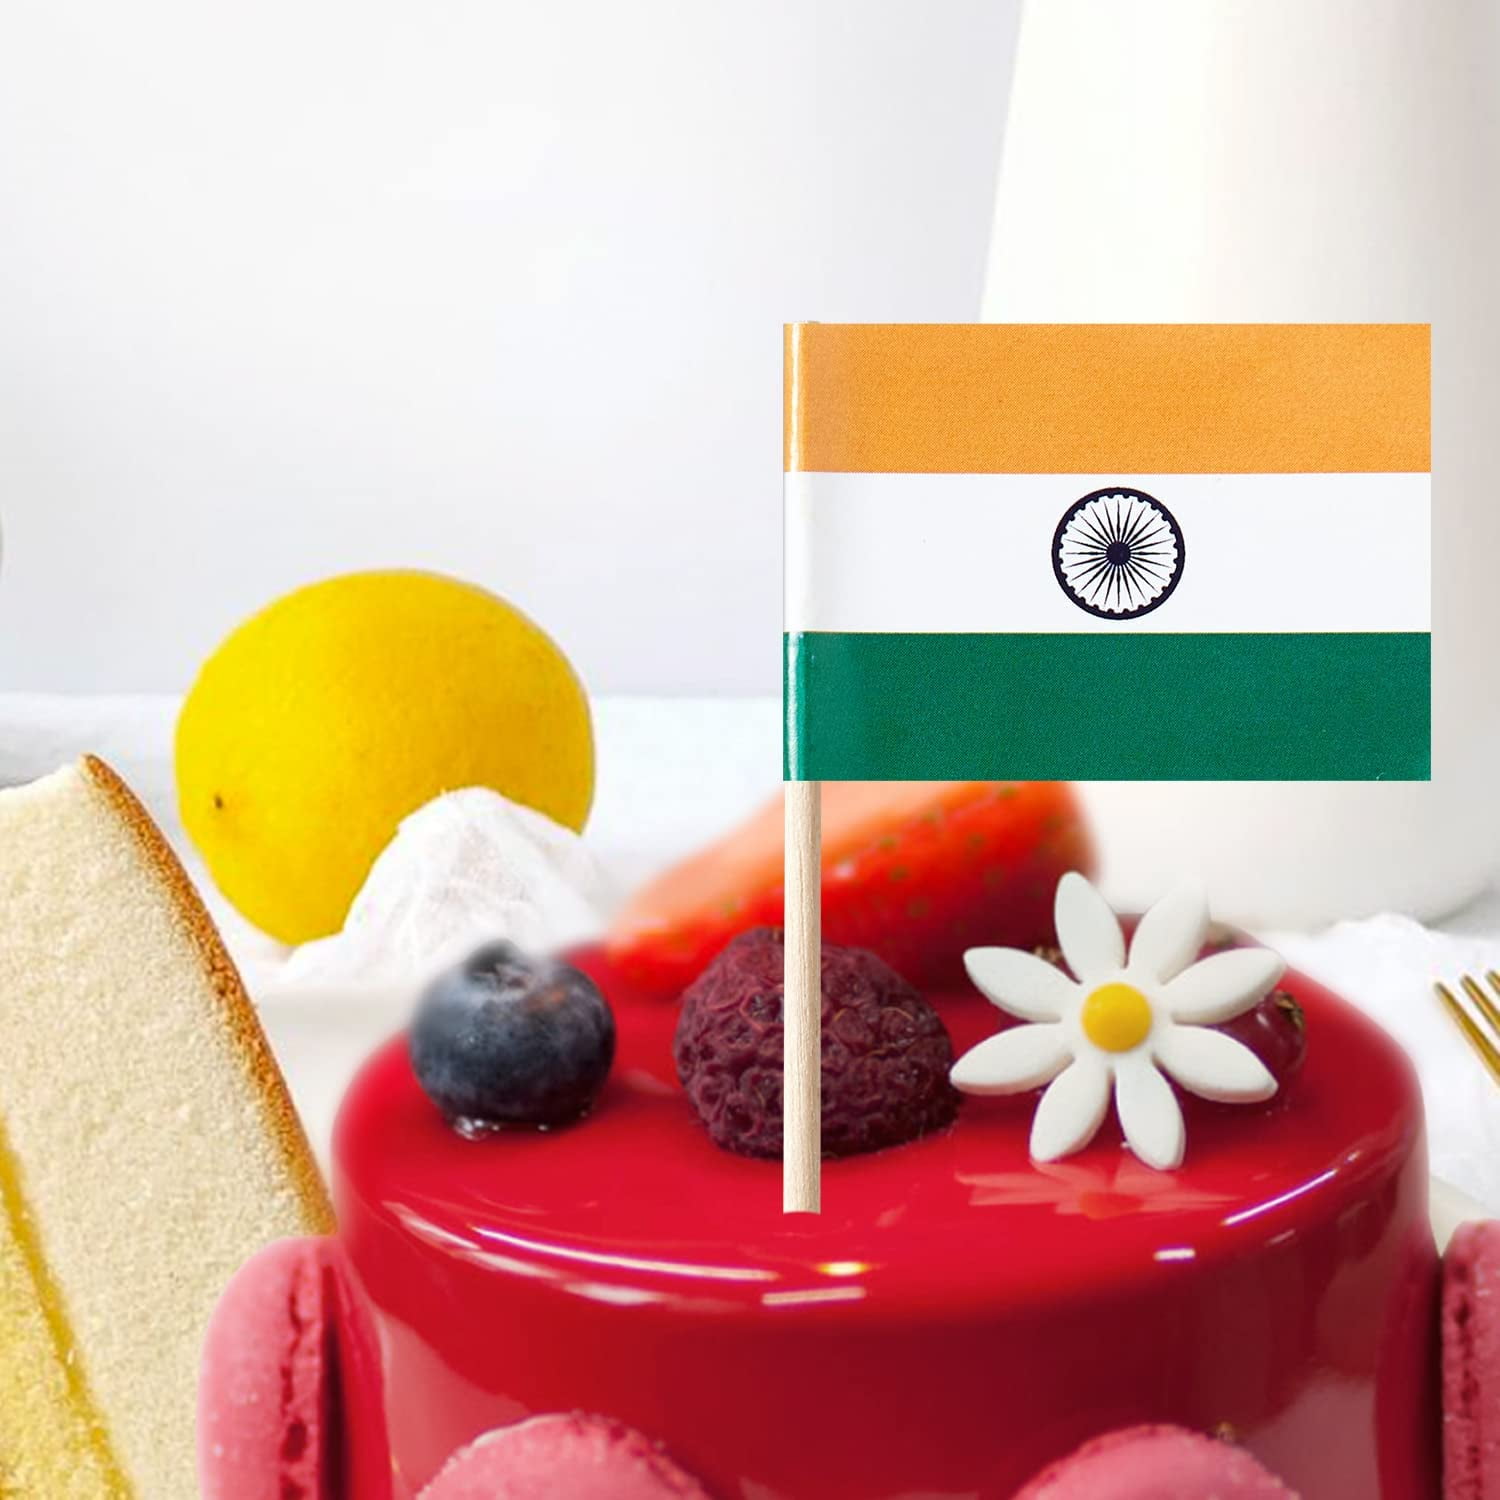 Cutting cake that has a national flag does not amount to insulting the  national flag - Law Trend